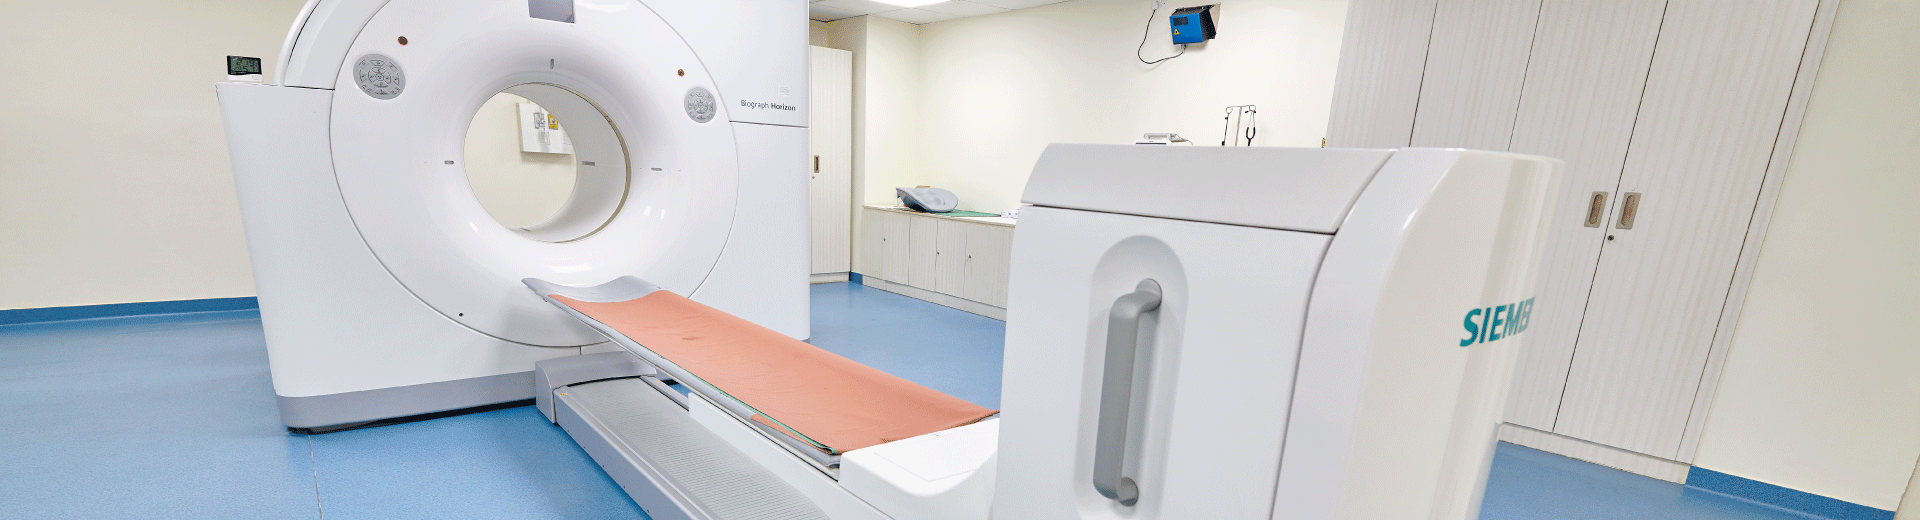 Stereotactic Radiotherapy (SRT)